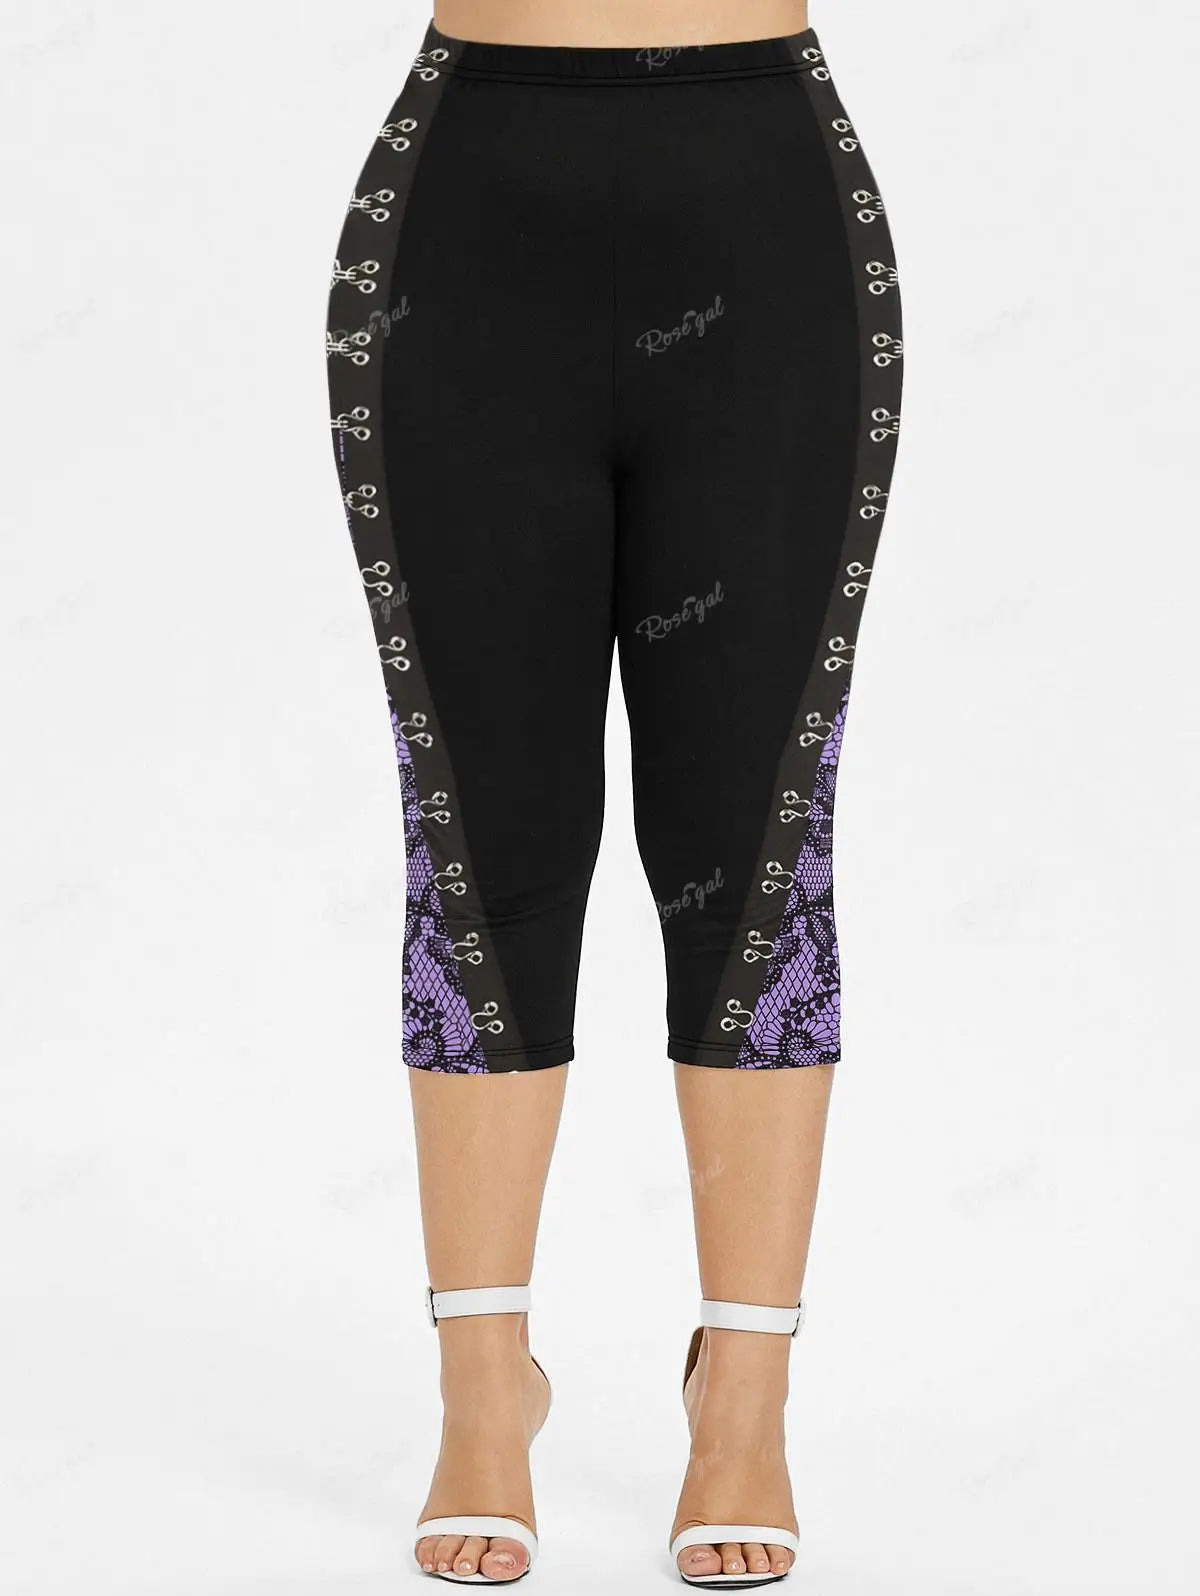 Cinched Tank Top and Capri Leggings Plus Size Outfit | 2-Piece Set or Separates | Hook and Eye Closure | Floral Lace 3D Print